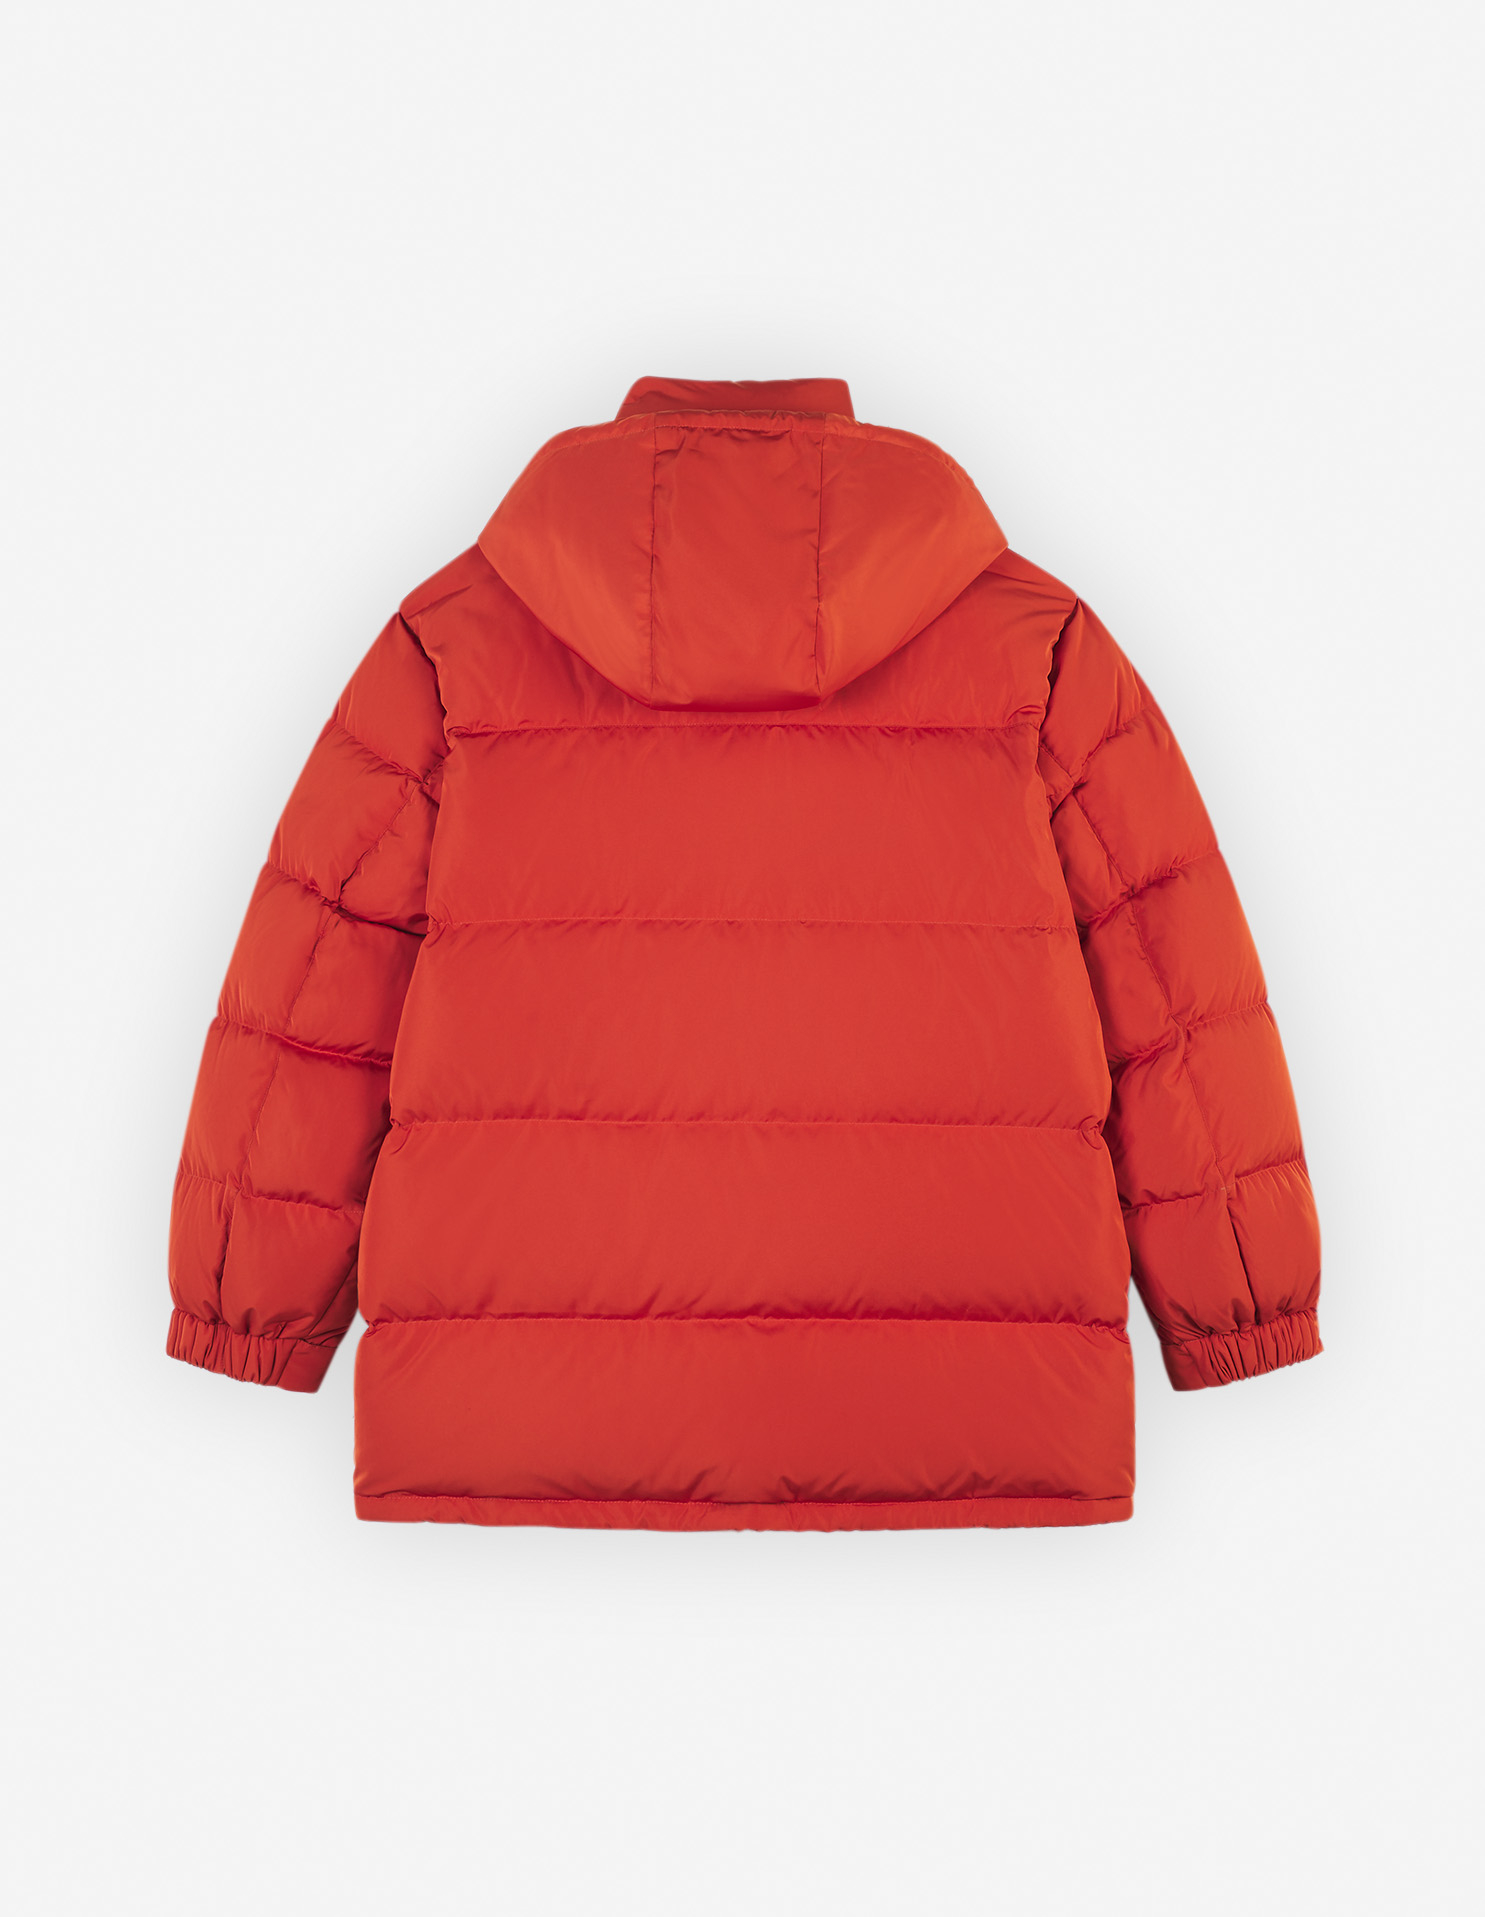 Maison Kitsuné Hooded Puffer in Nylon with Bold Fox Head Patch Pecan Brown Pecan Brown / M